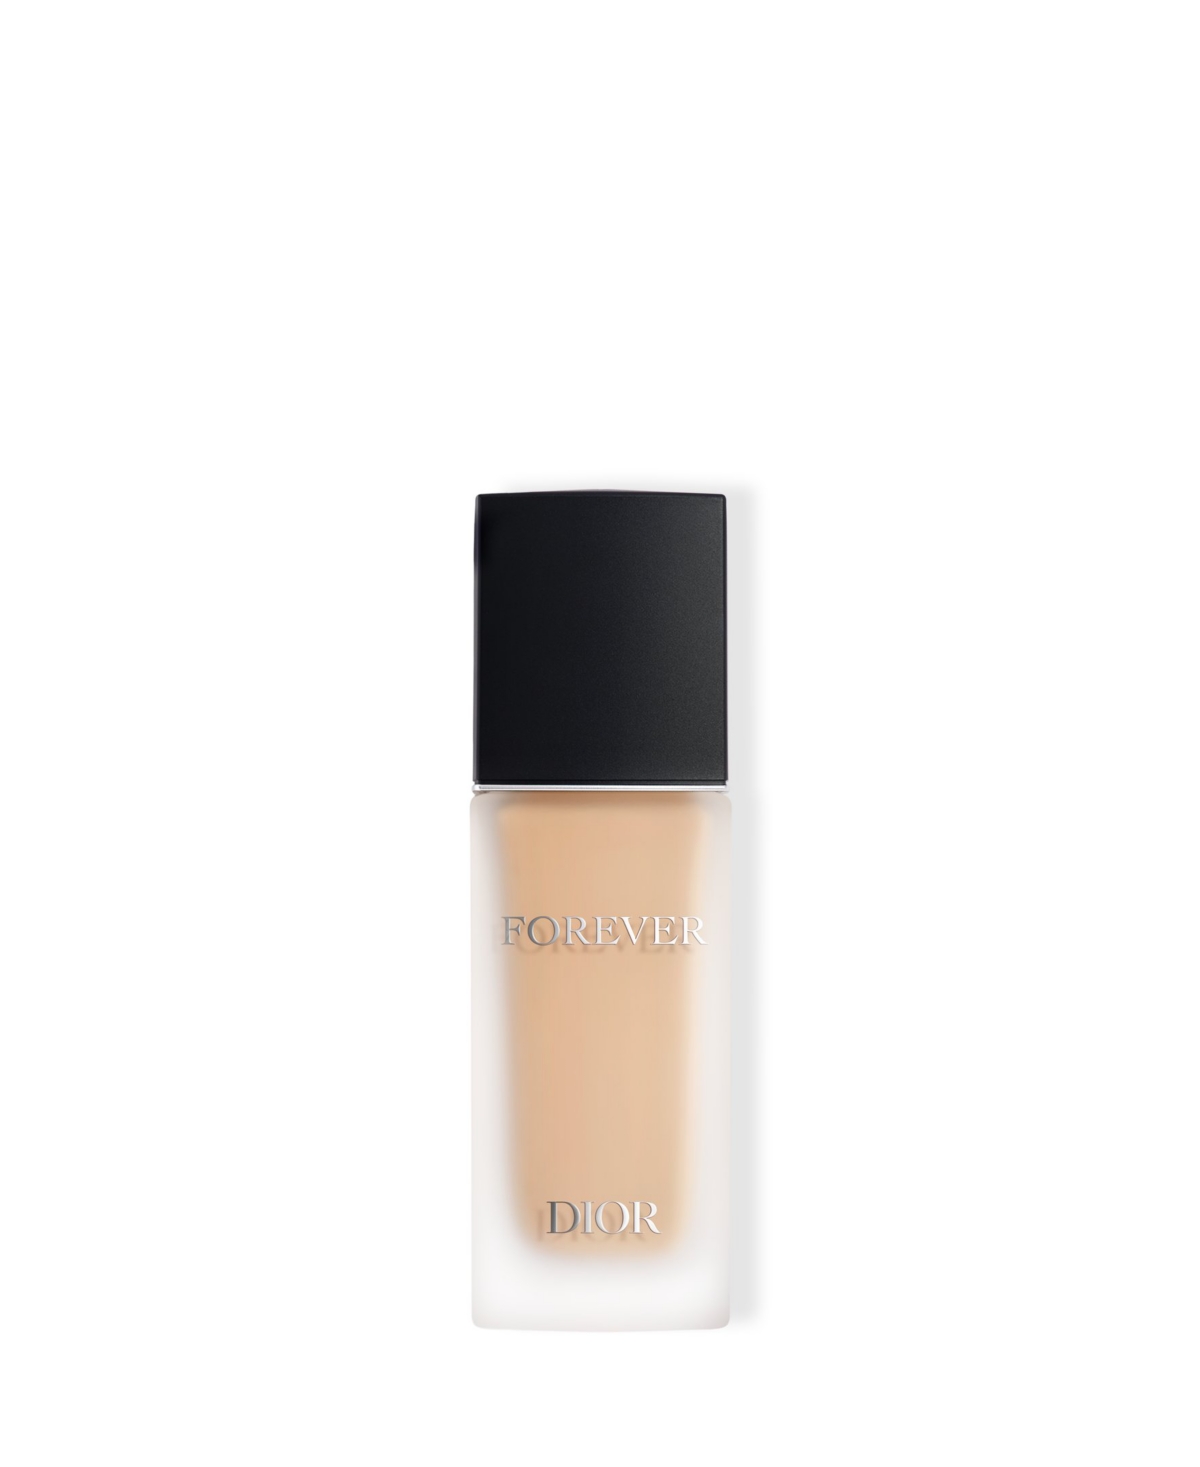 Dior Forever Matte Skincare Foundation Spf 15 In . Neutral (fair Skin With Neutral Tones)